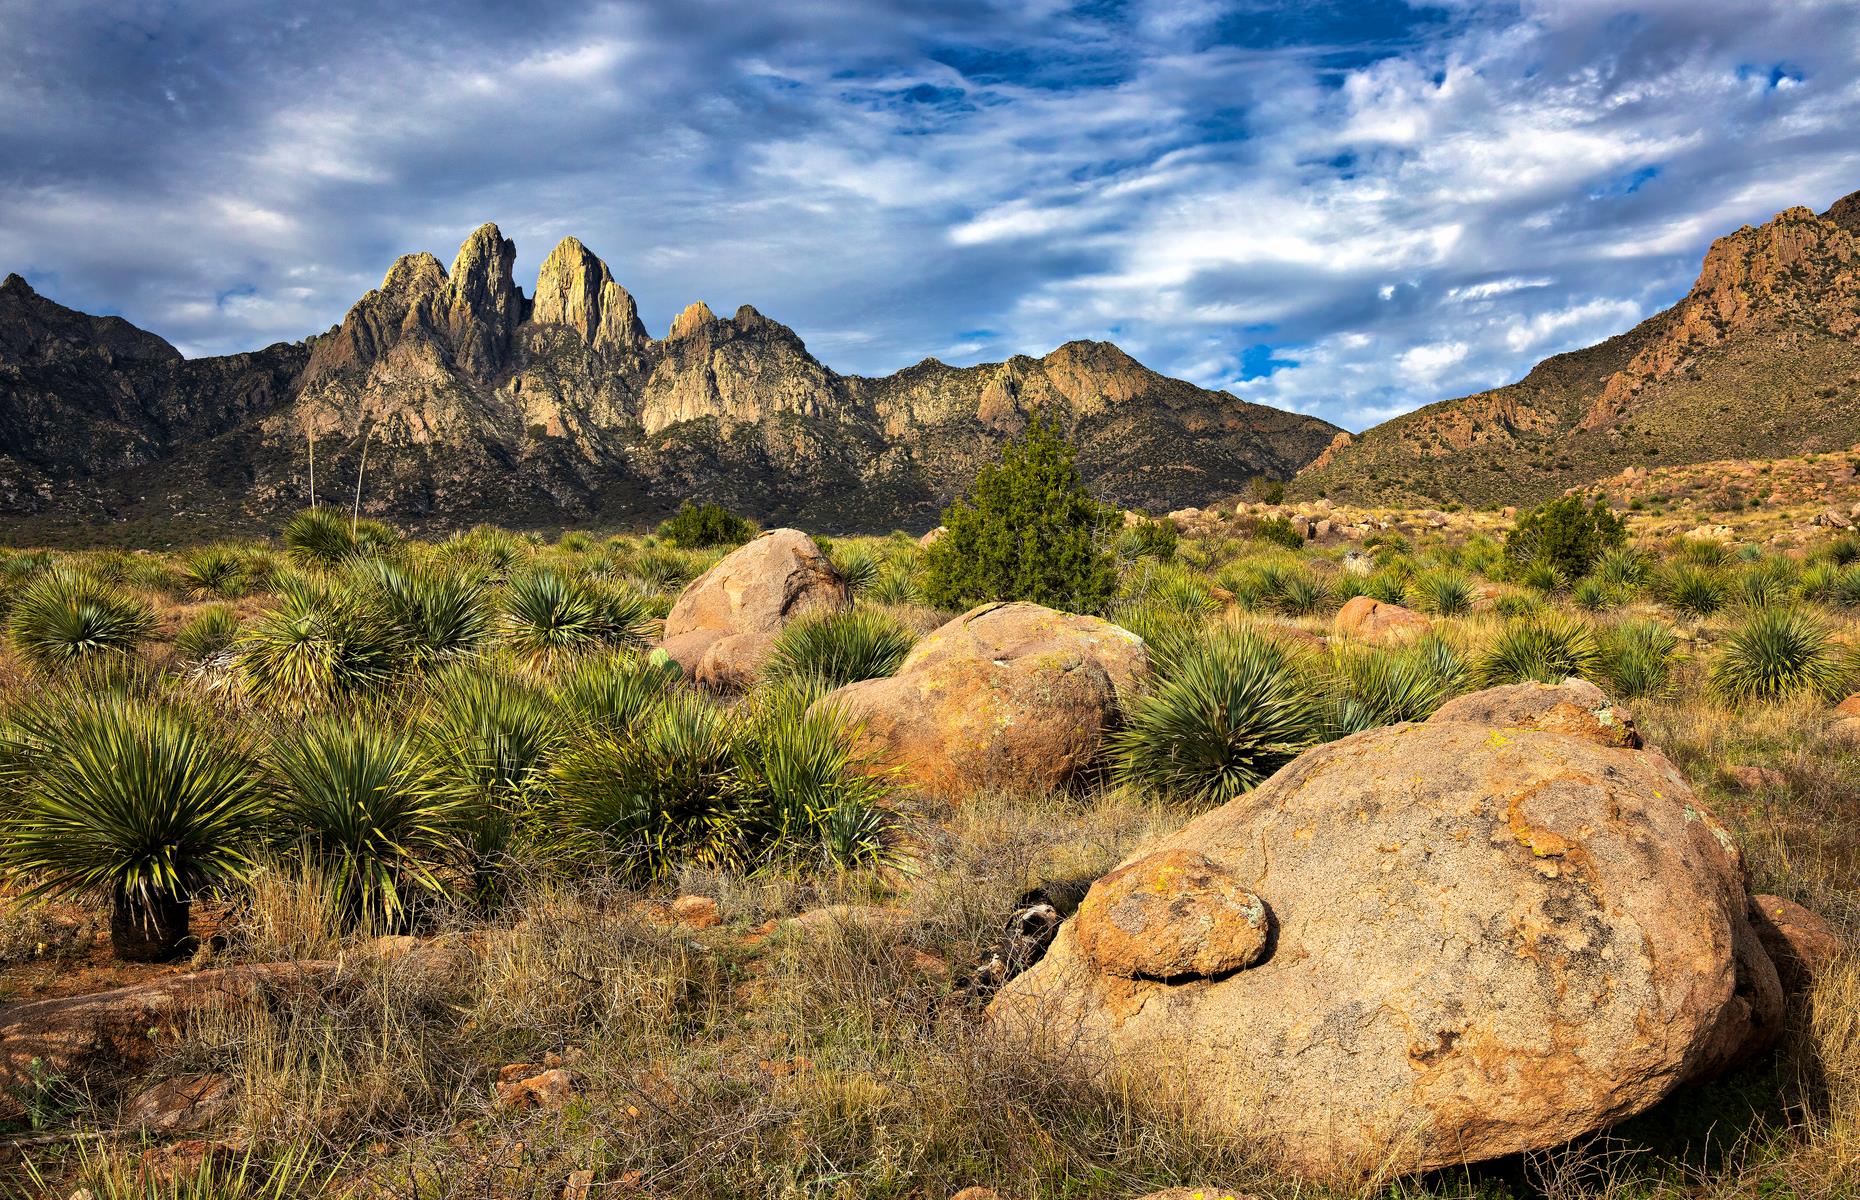 <p>New Mexico is nicknamed the Land of Enchantment – and with National Monuments like this one, it’s easy to see why. Organ Mountains-Desert Peaks encompasses a great stretch of craggy pinnacles in southern New Mexico. The namesake Organ Mountains are the most striking of all – a gloriously rugged huddle of bluffs that rises some 9,000 feet above the Chihuahuan Desert floor. Great desert plains and lush pine woodlands complete the picture.</p>